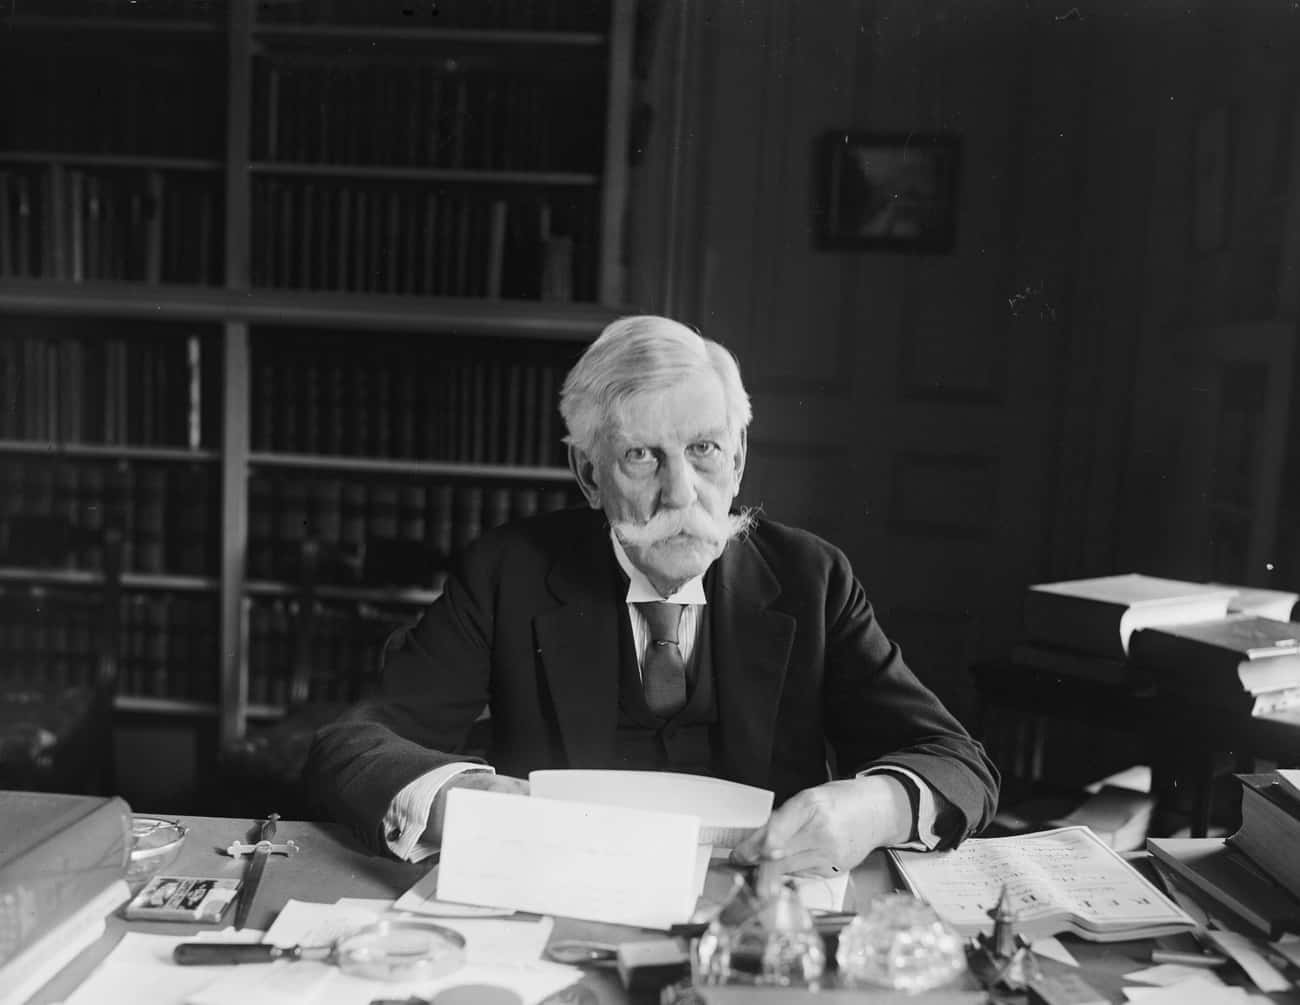 Oliver Wendell Holmes Bridged The 1700s And 1900s By Meeting Both John Quincy Adams And JFK